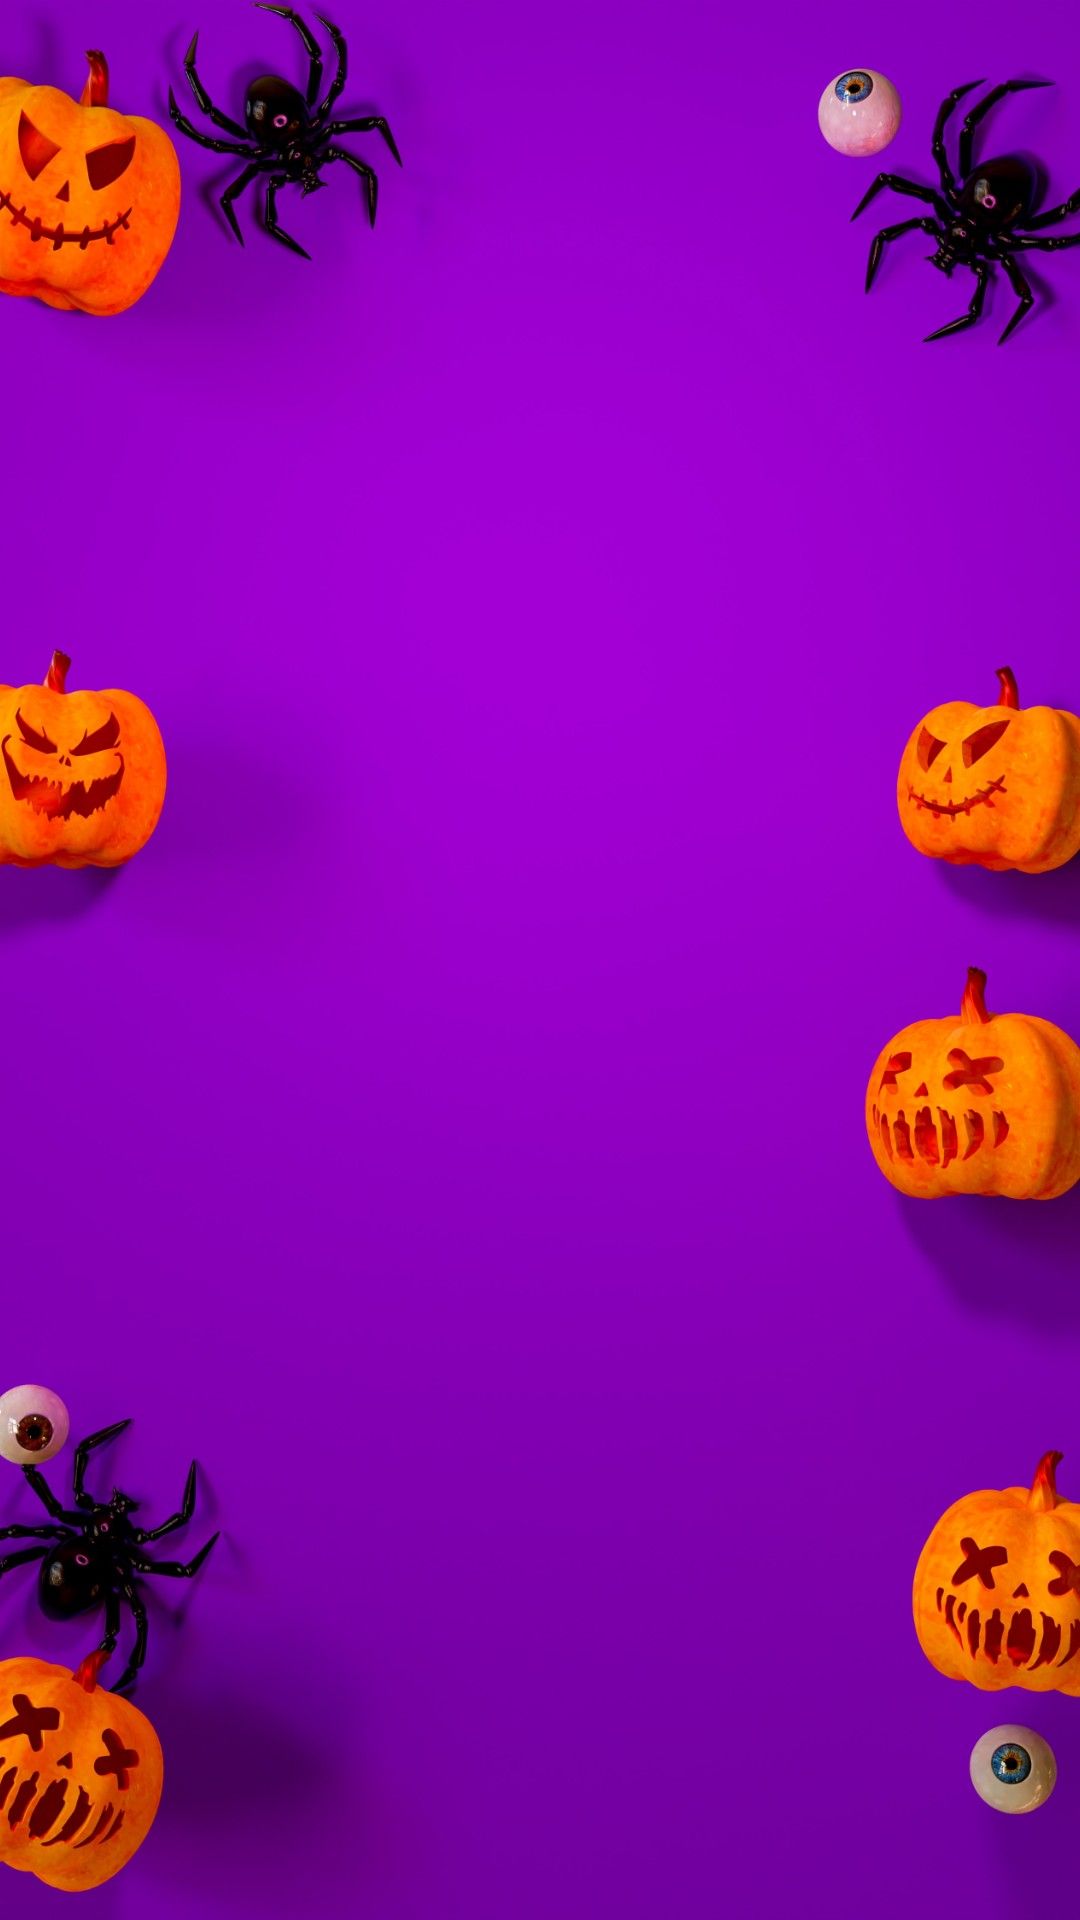 Purple background with Halloween pumpkins and spiders on the corners - Halloween